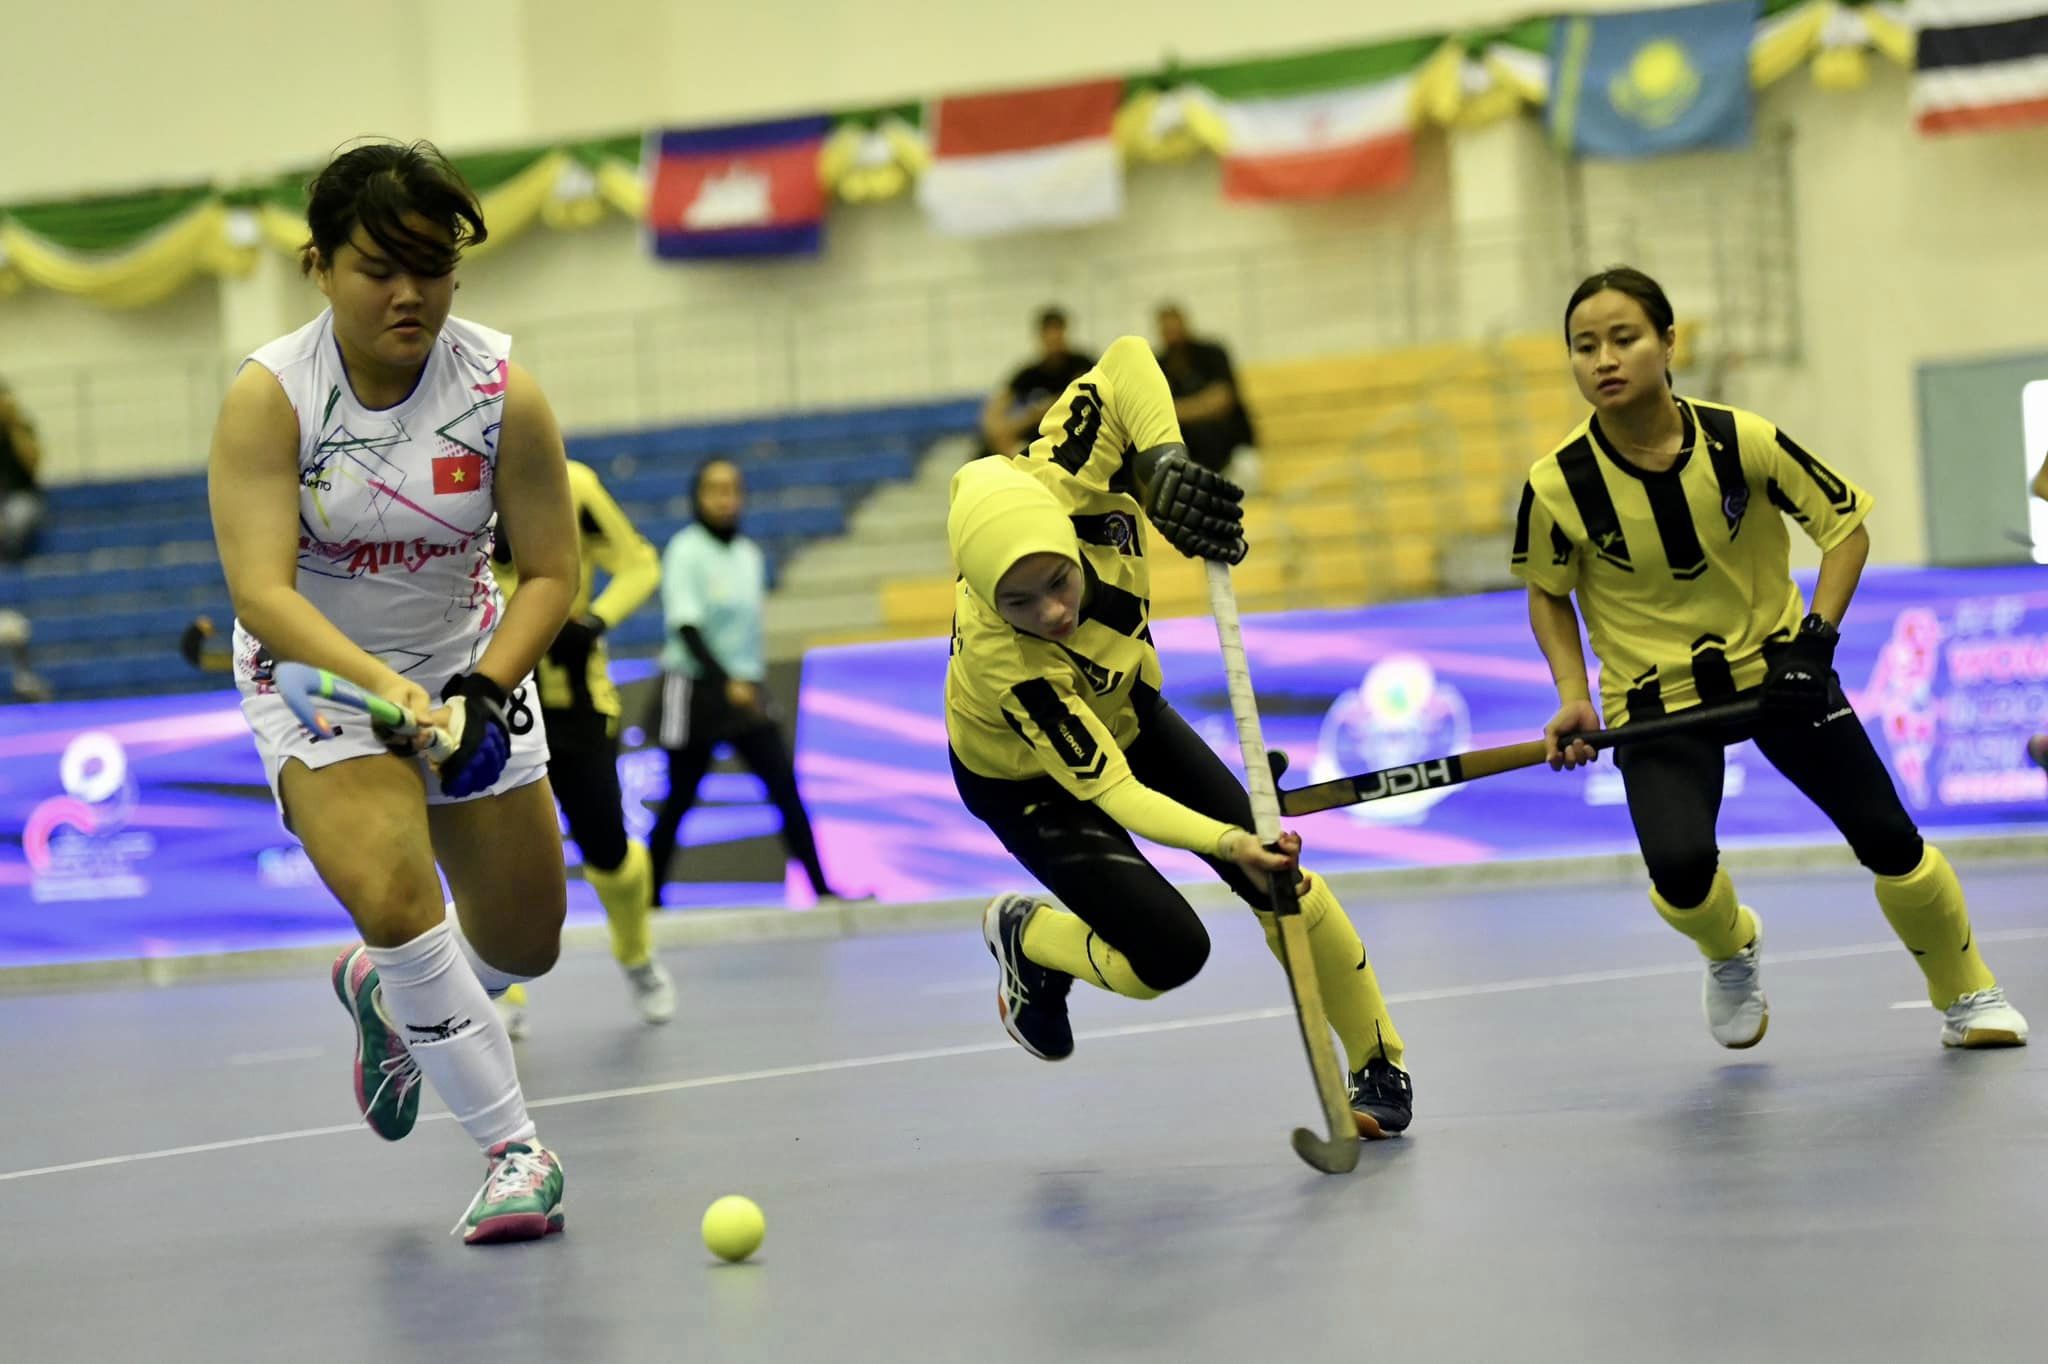 Women’s Indoor Hockey Asia Cup: Tigresses roar as they open with a whopping 25-0 win